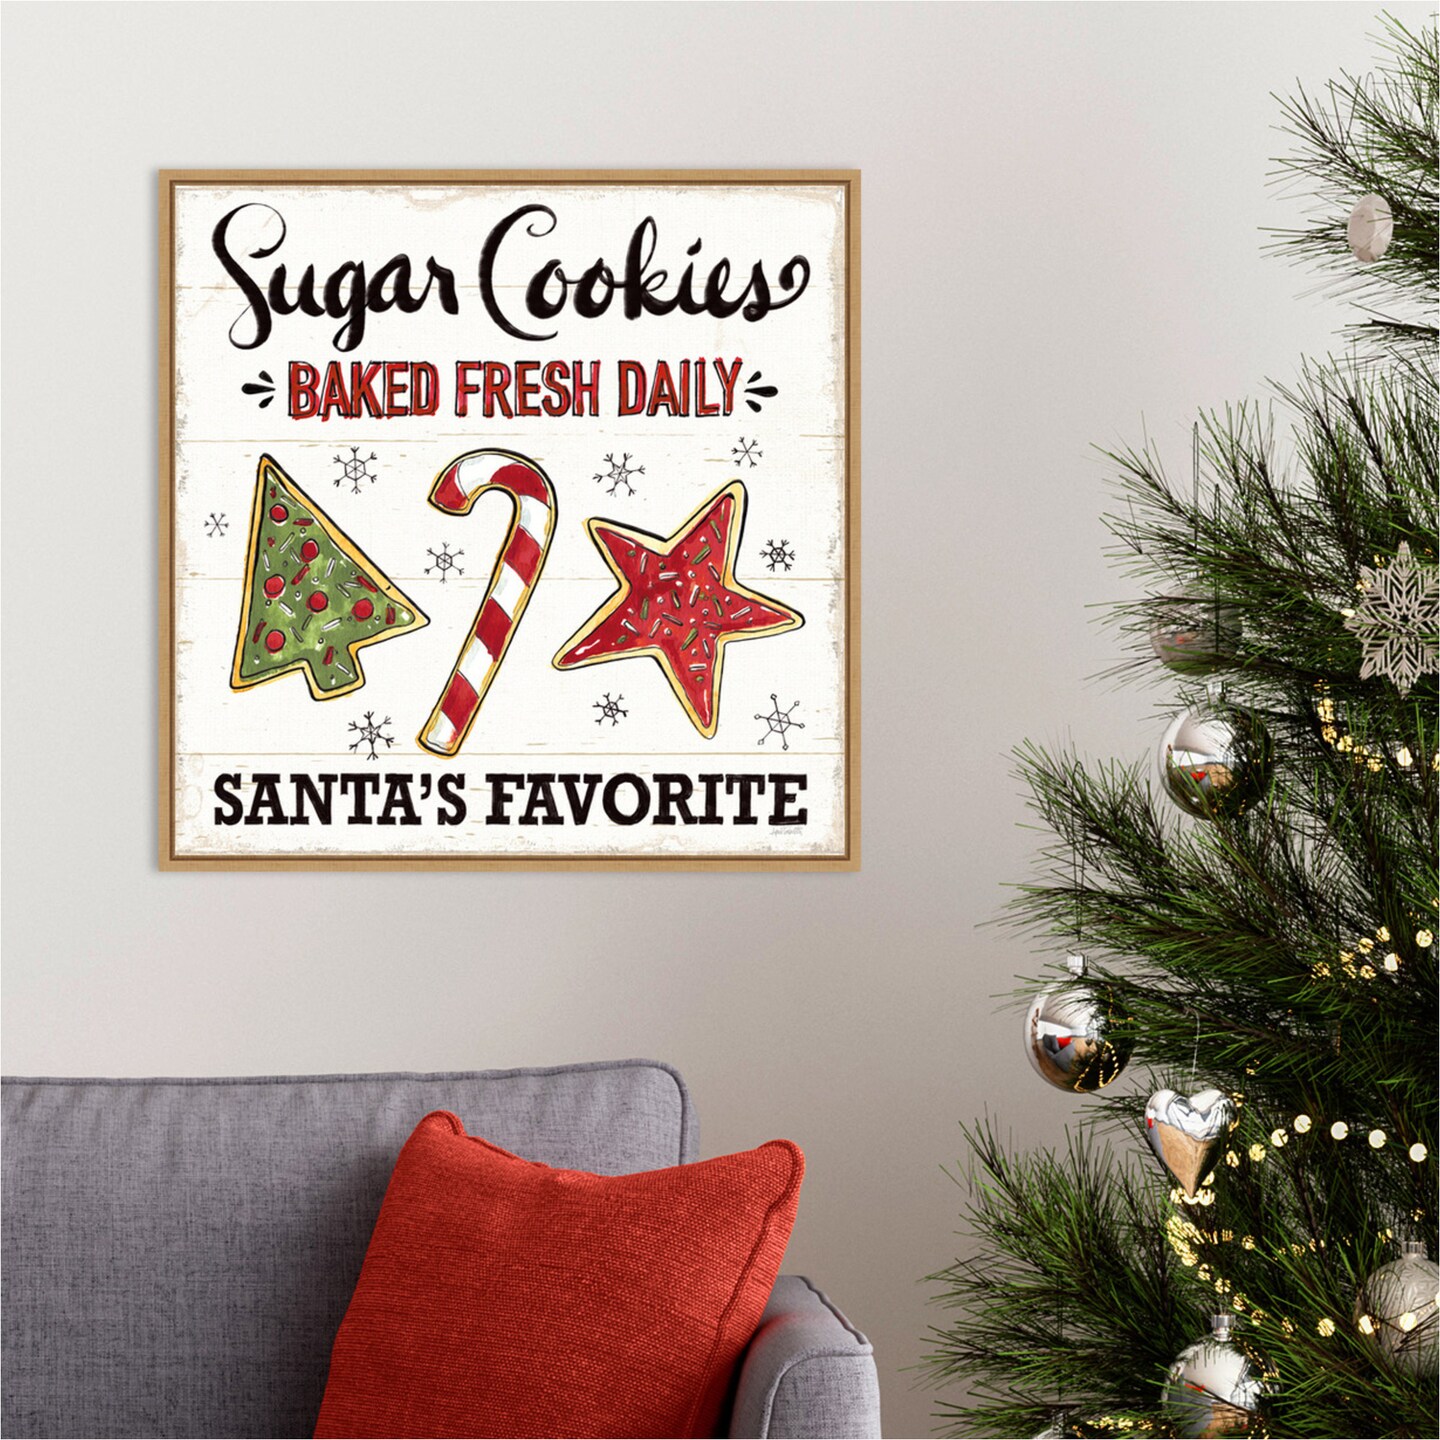 Christmas Treats II by Anne Tavoletti 22-in. W x 22-in. H. Canvas Wall Art Print Framed in Natural